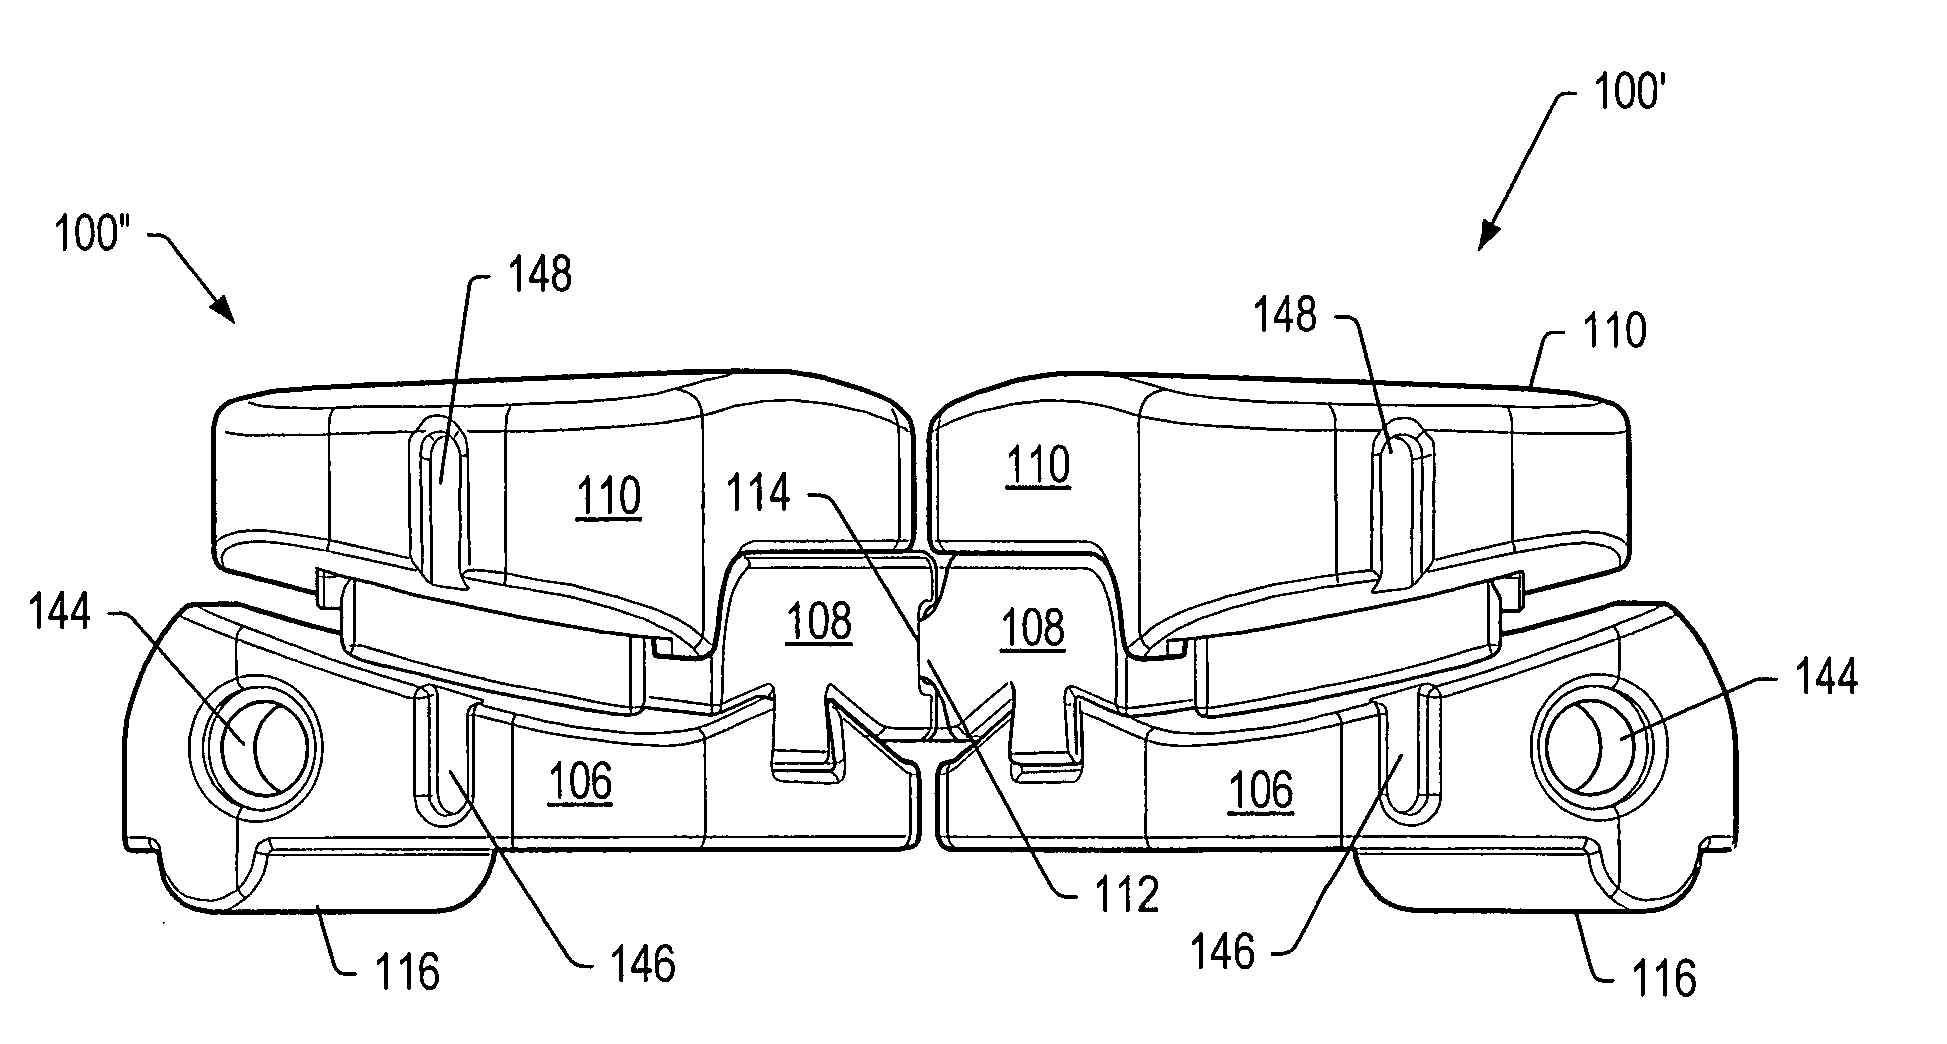 Spinal stabilization systems with dynamic interbody devices